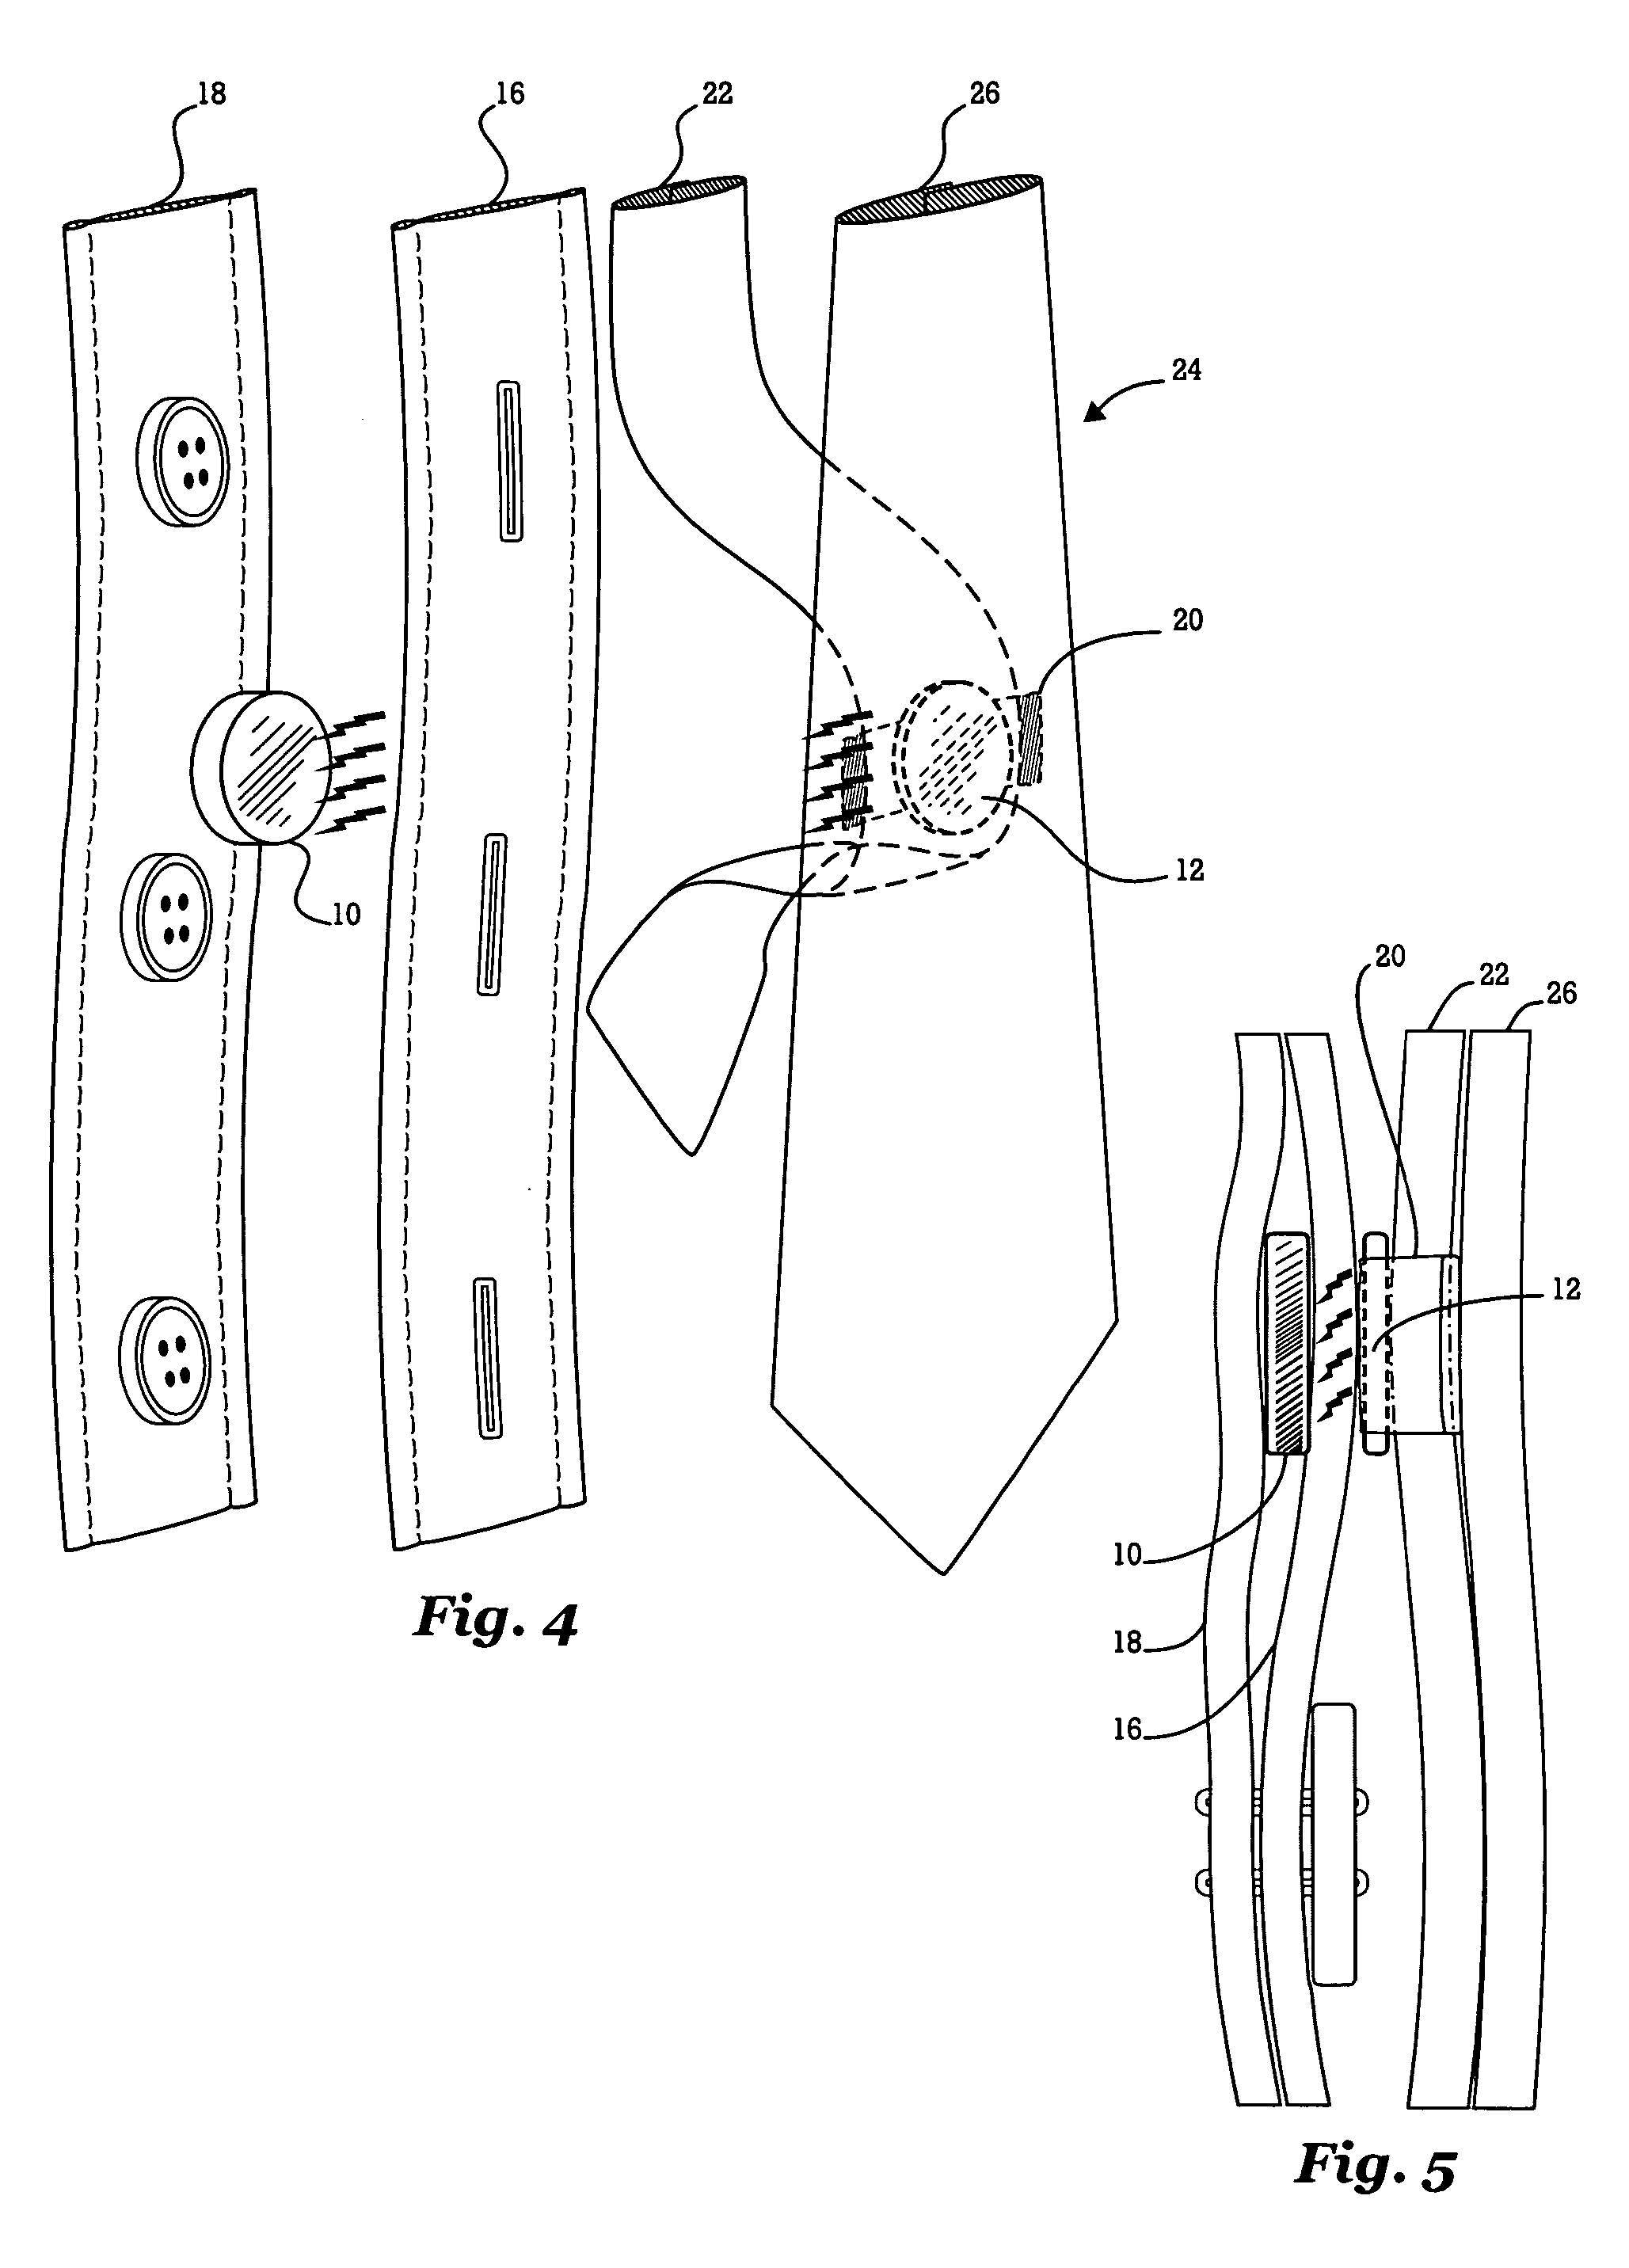 Apparatus and method for holding garments